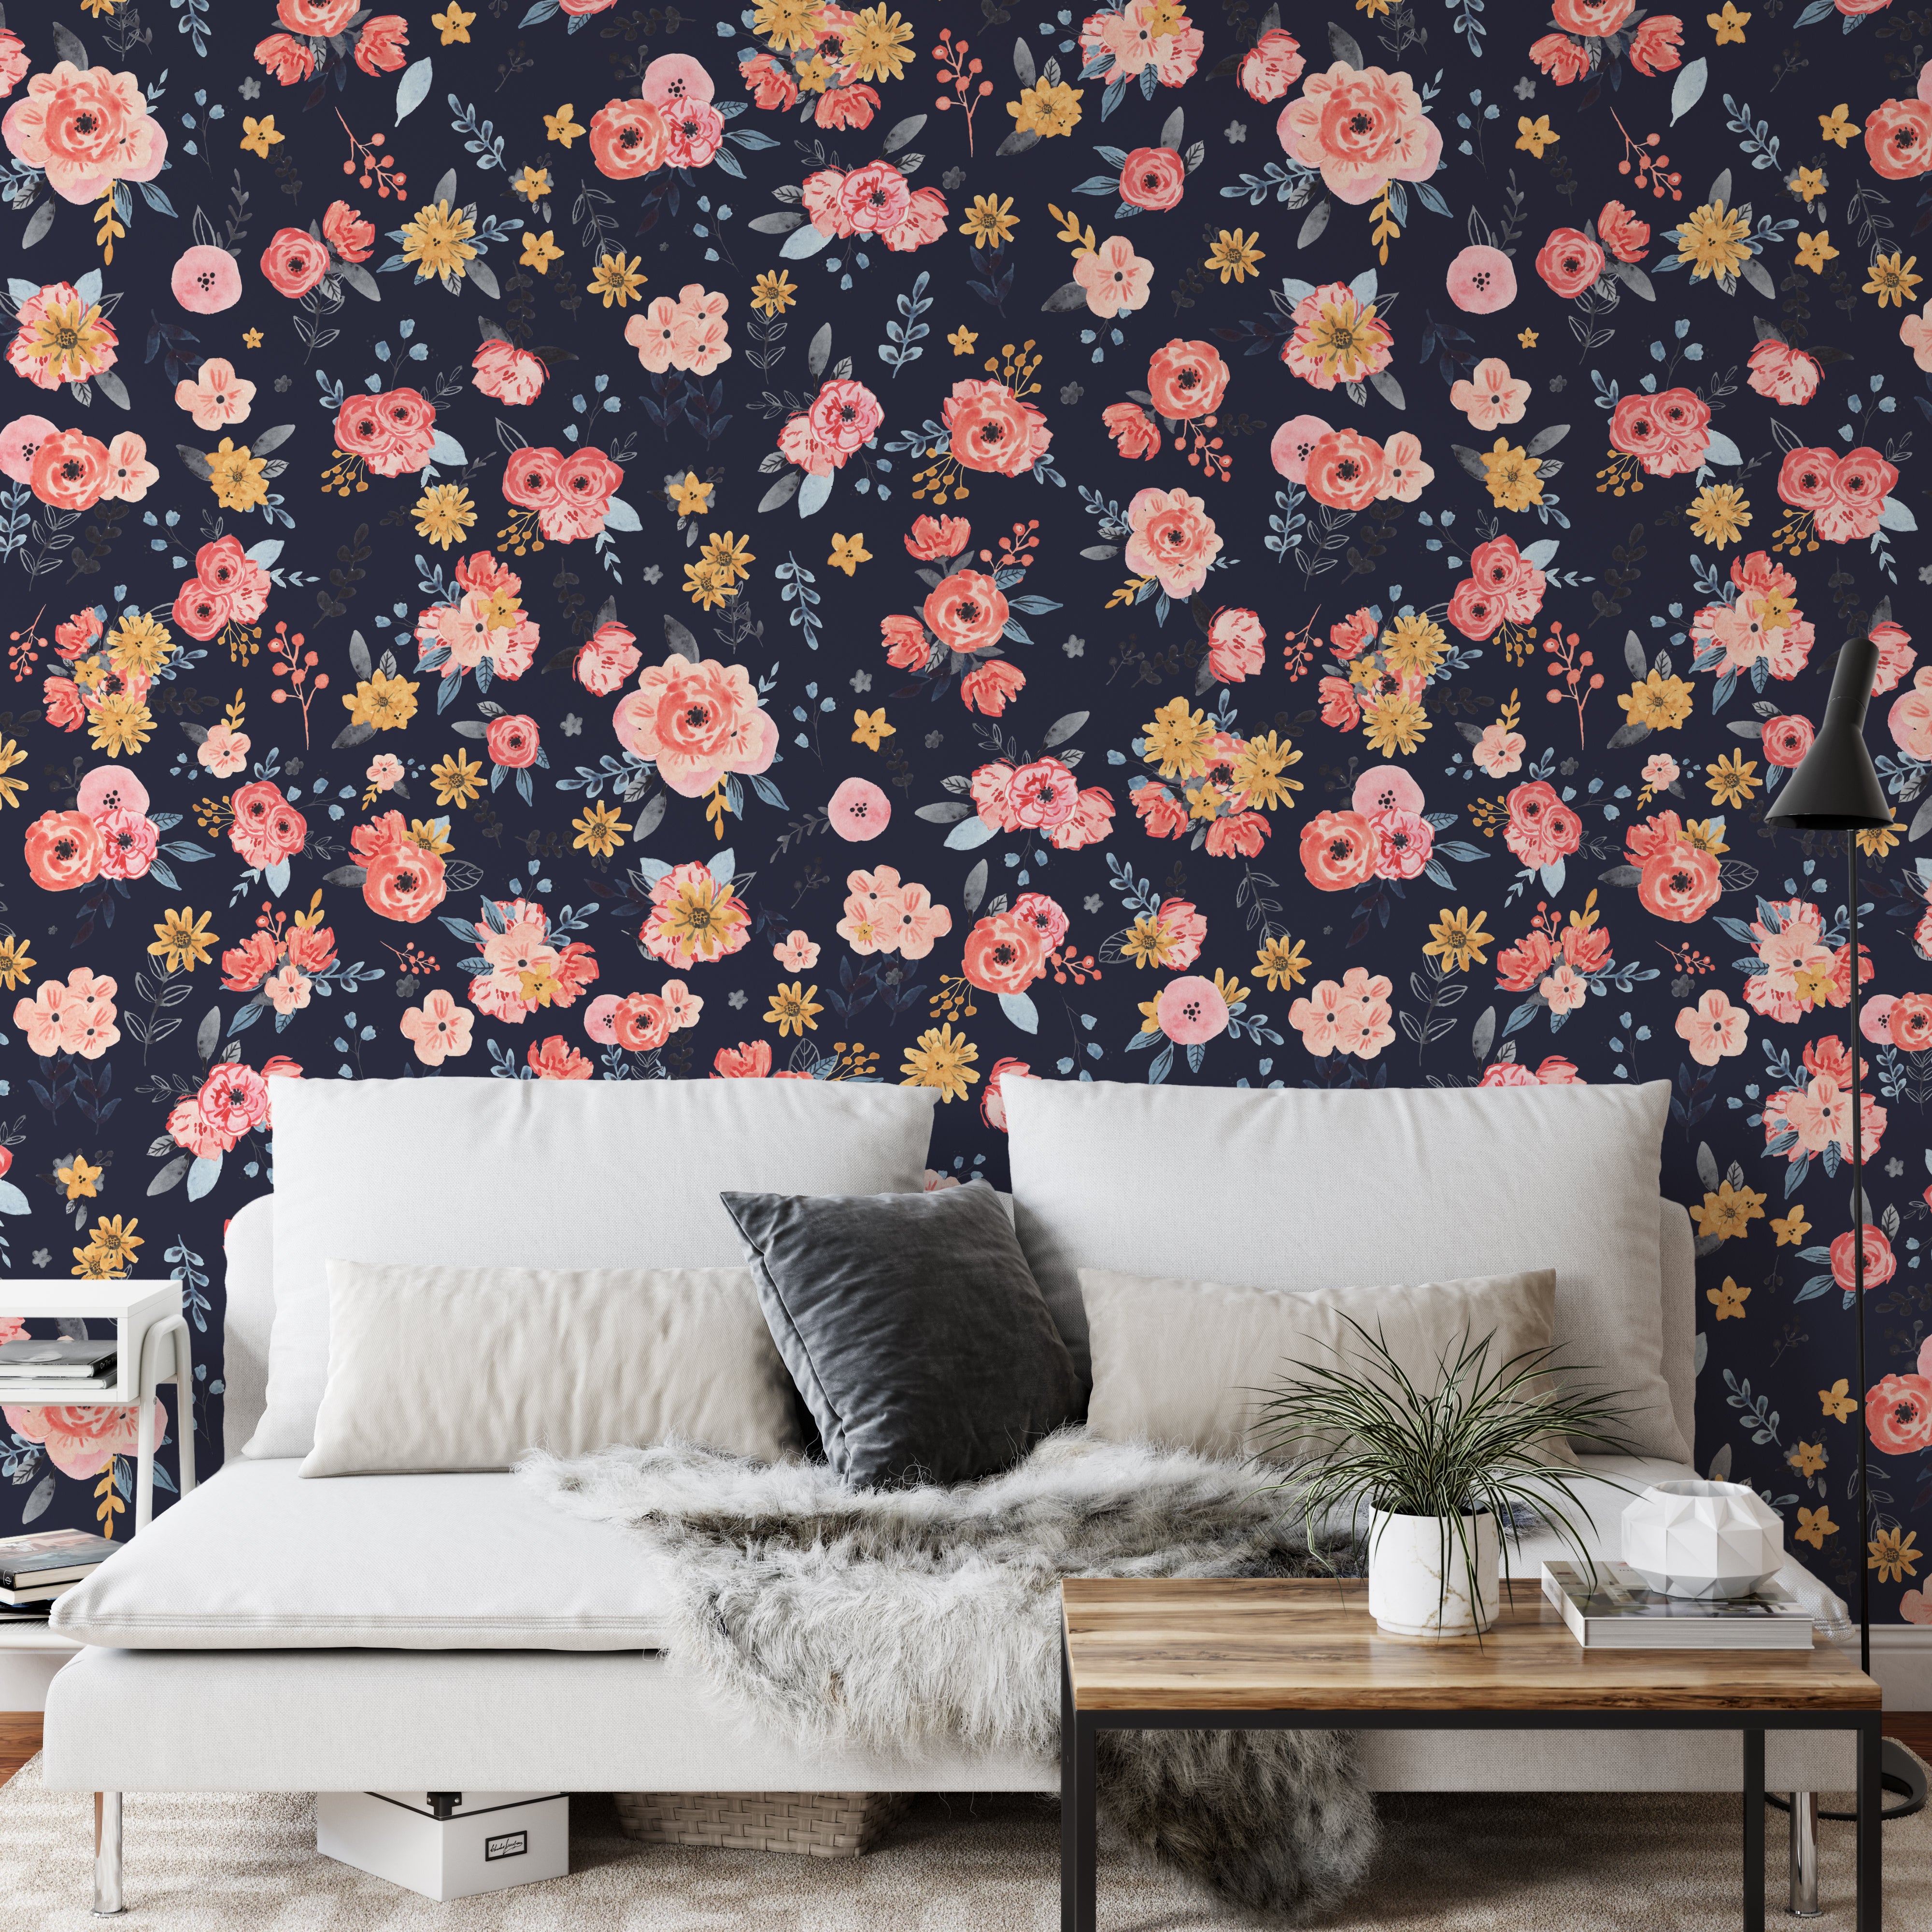 In Bloom - Navy Edition Wallpaper - Wall Blush from WALL BLUSH